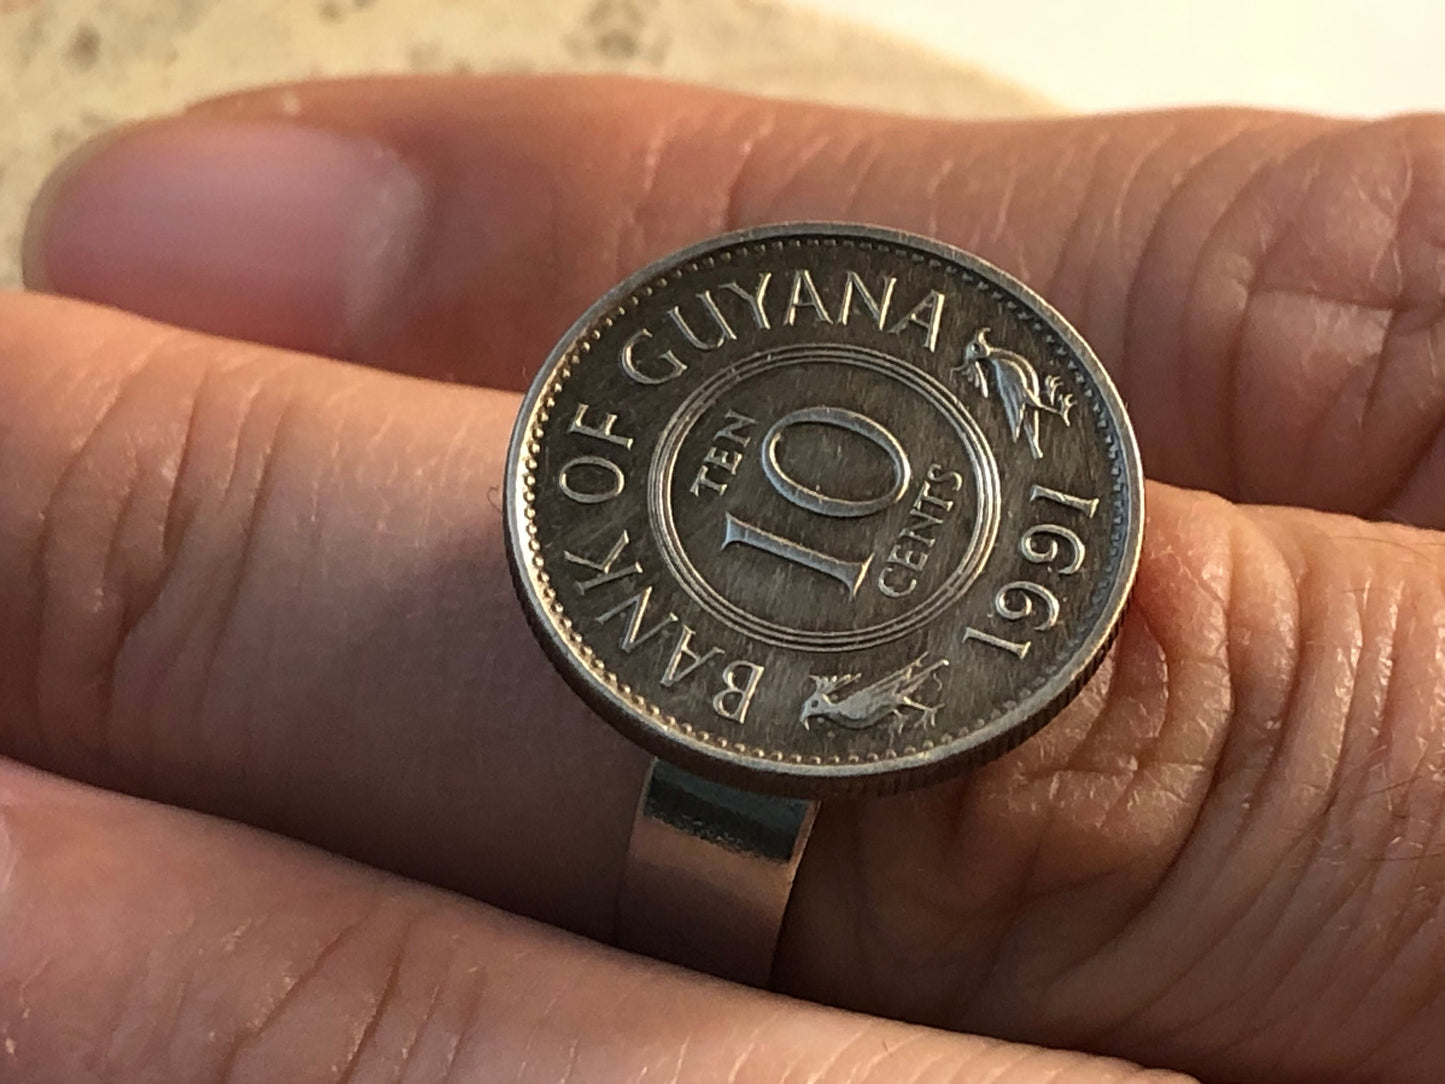 Guyana Coin Ring Guyanese 10 cents Vintage Adjustable Custom Made Rare Coins Coin Enthusiast Fashion Accessory Handmade